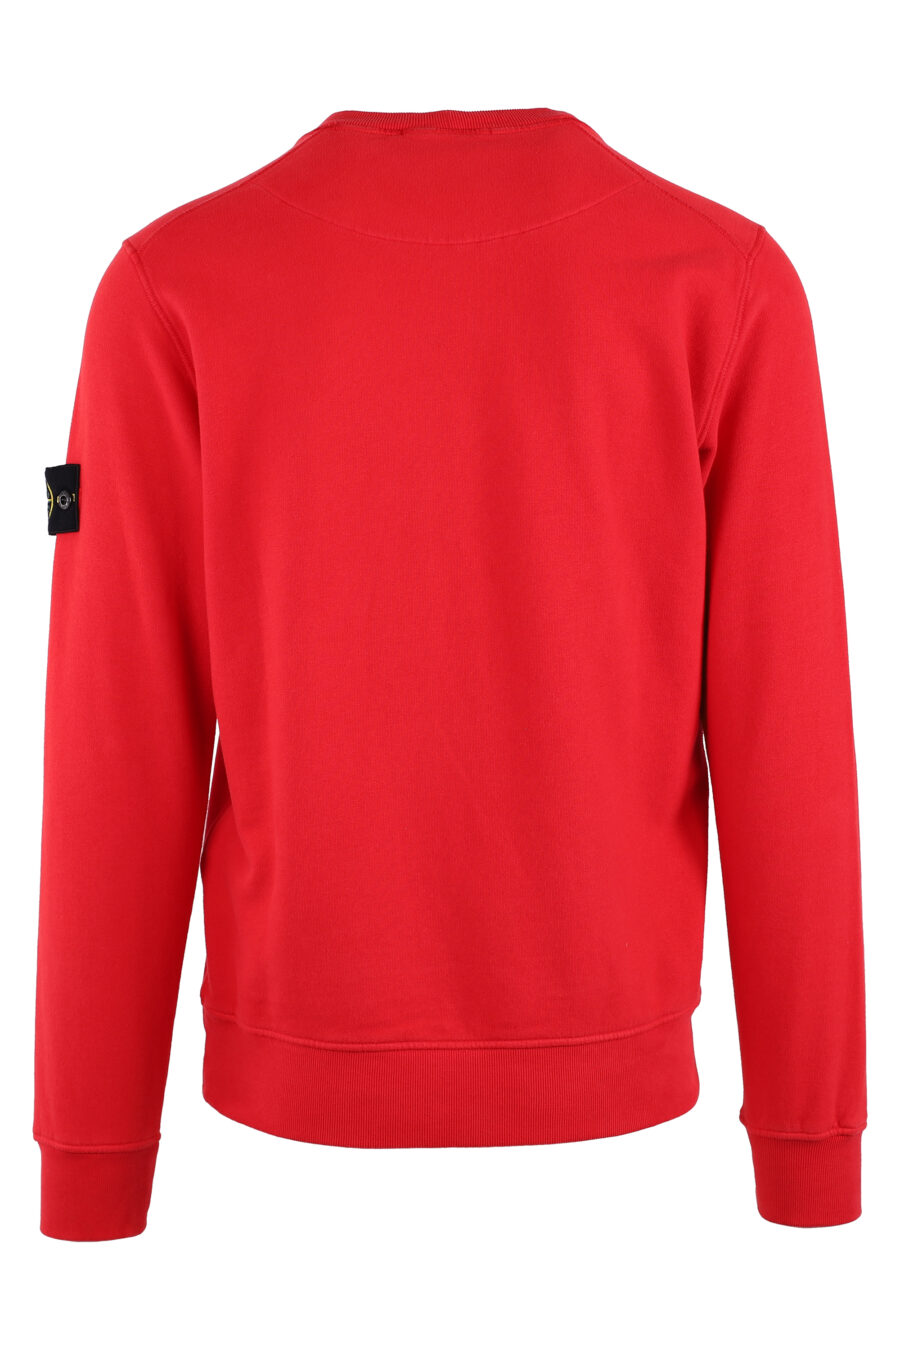 Red sweatshirt with logo patch - IMG 1462